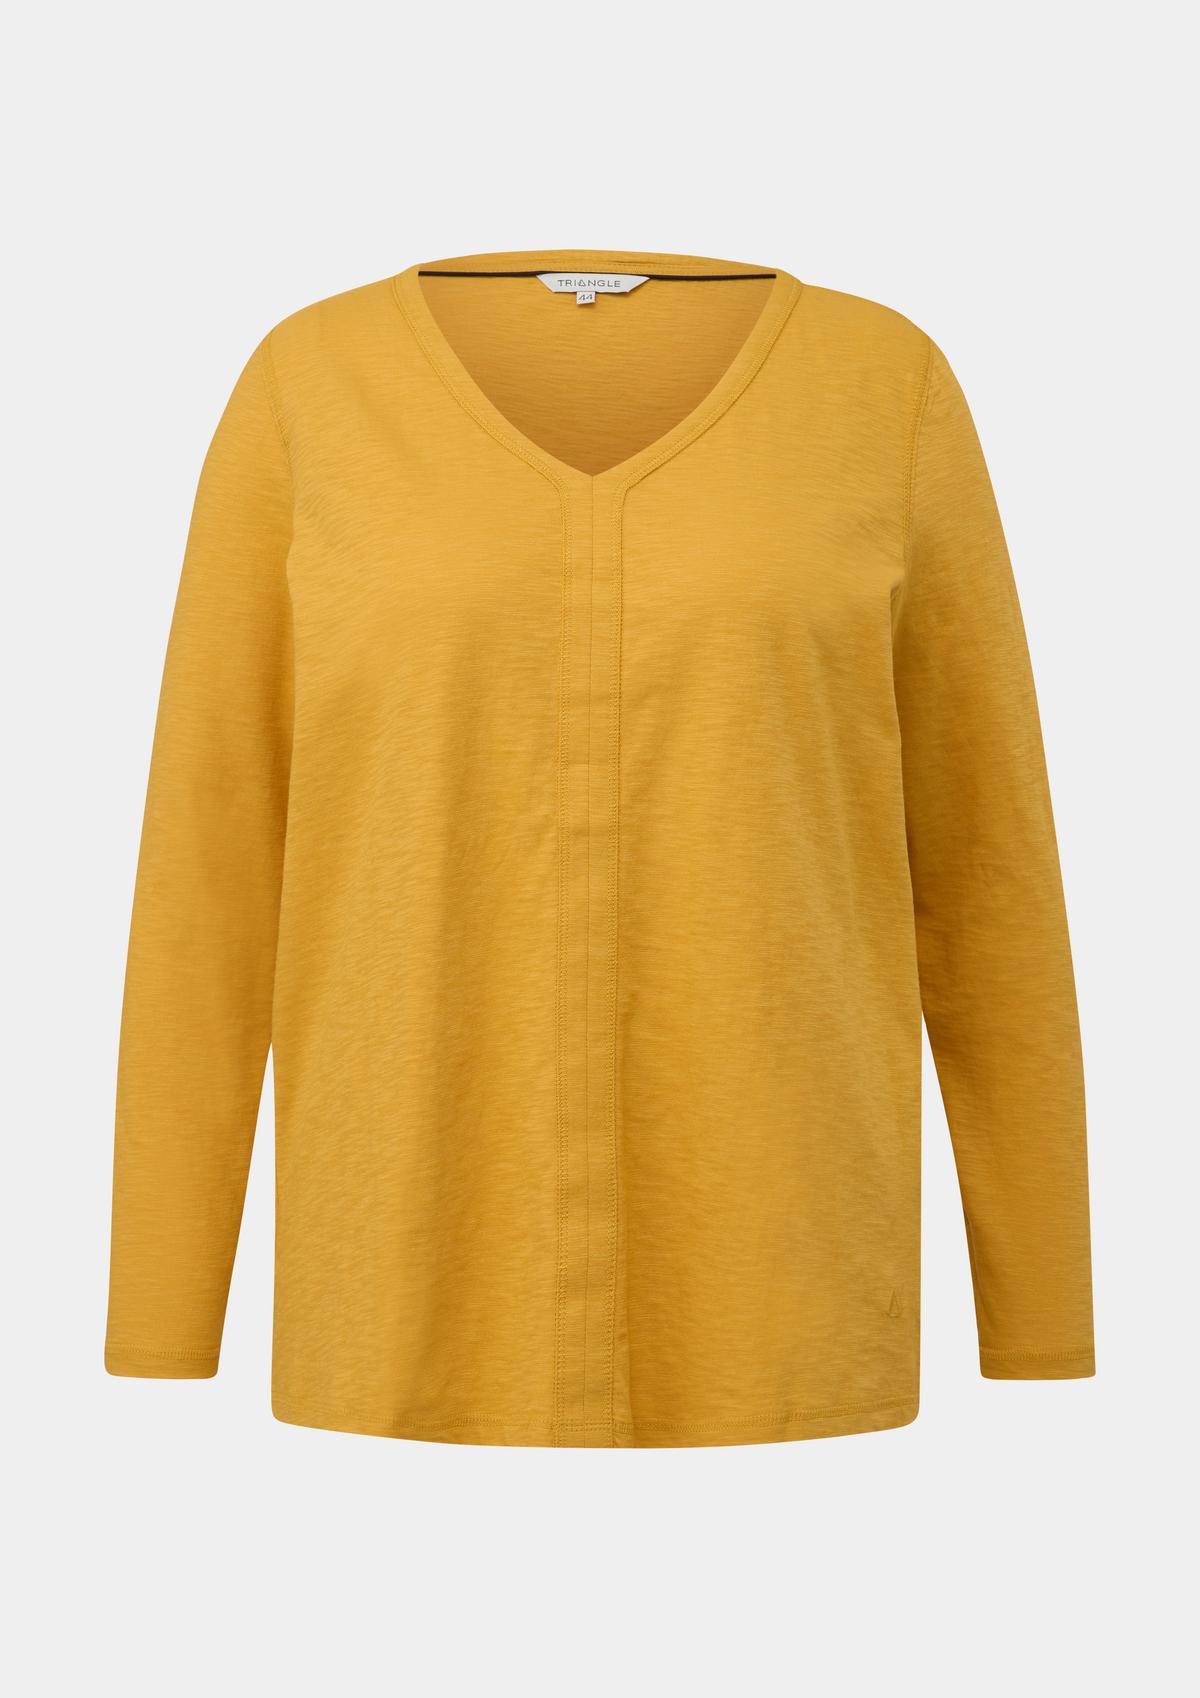 s.Oliver Long sleeve top with a dividing seam